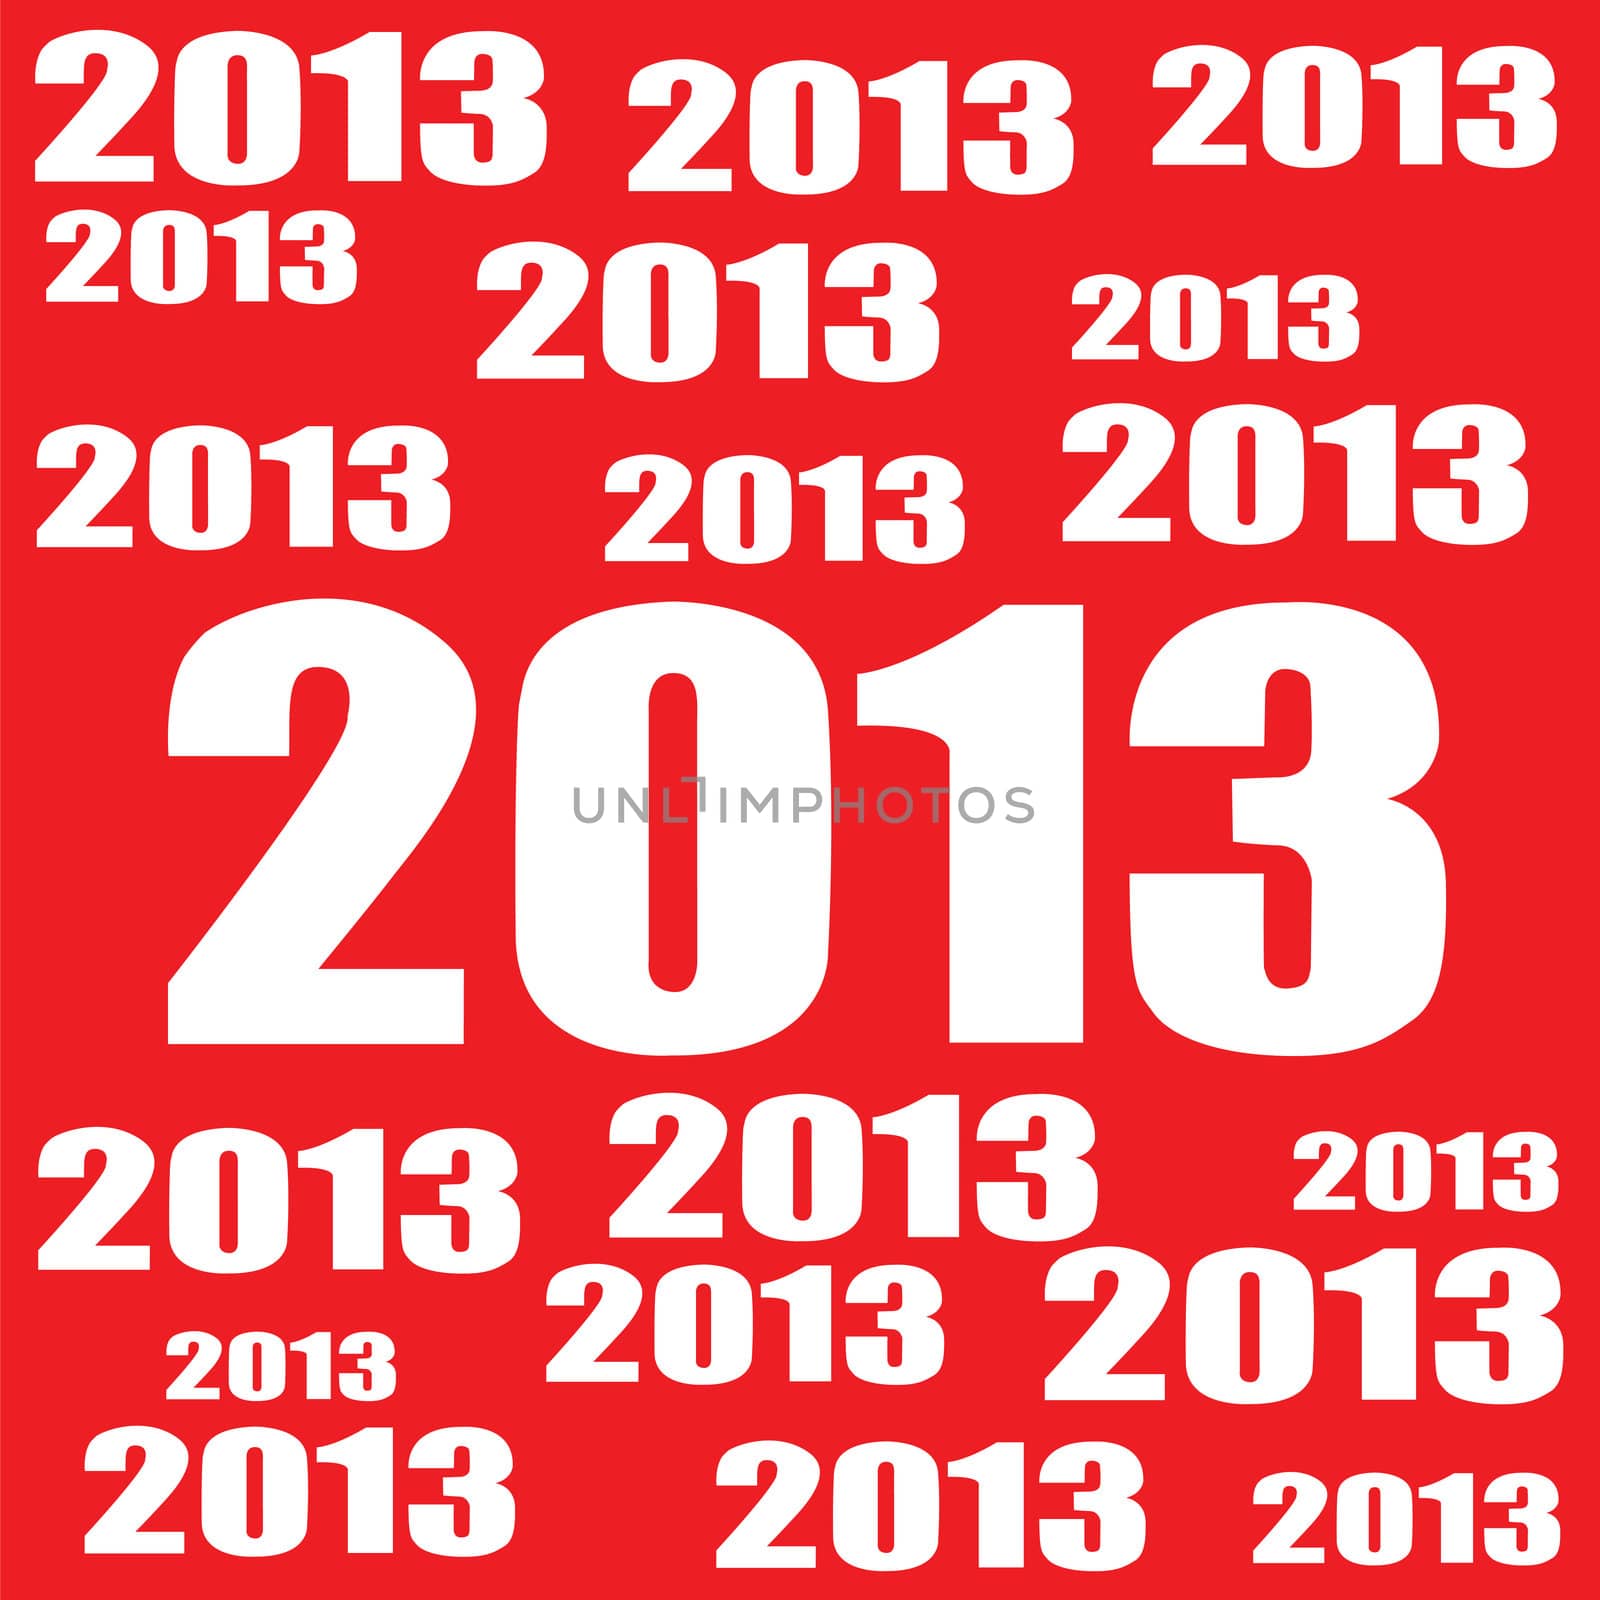 2013 year is coming soon.